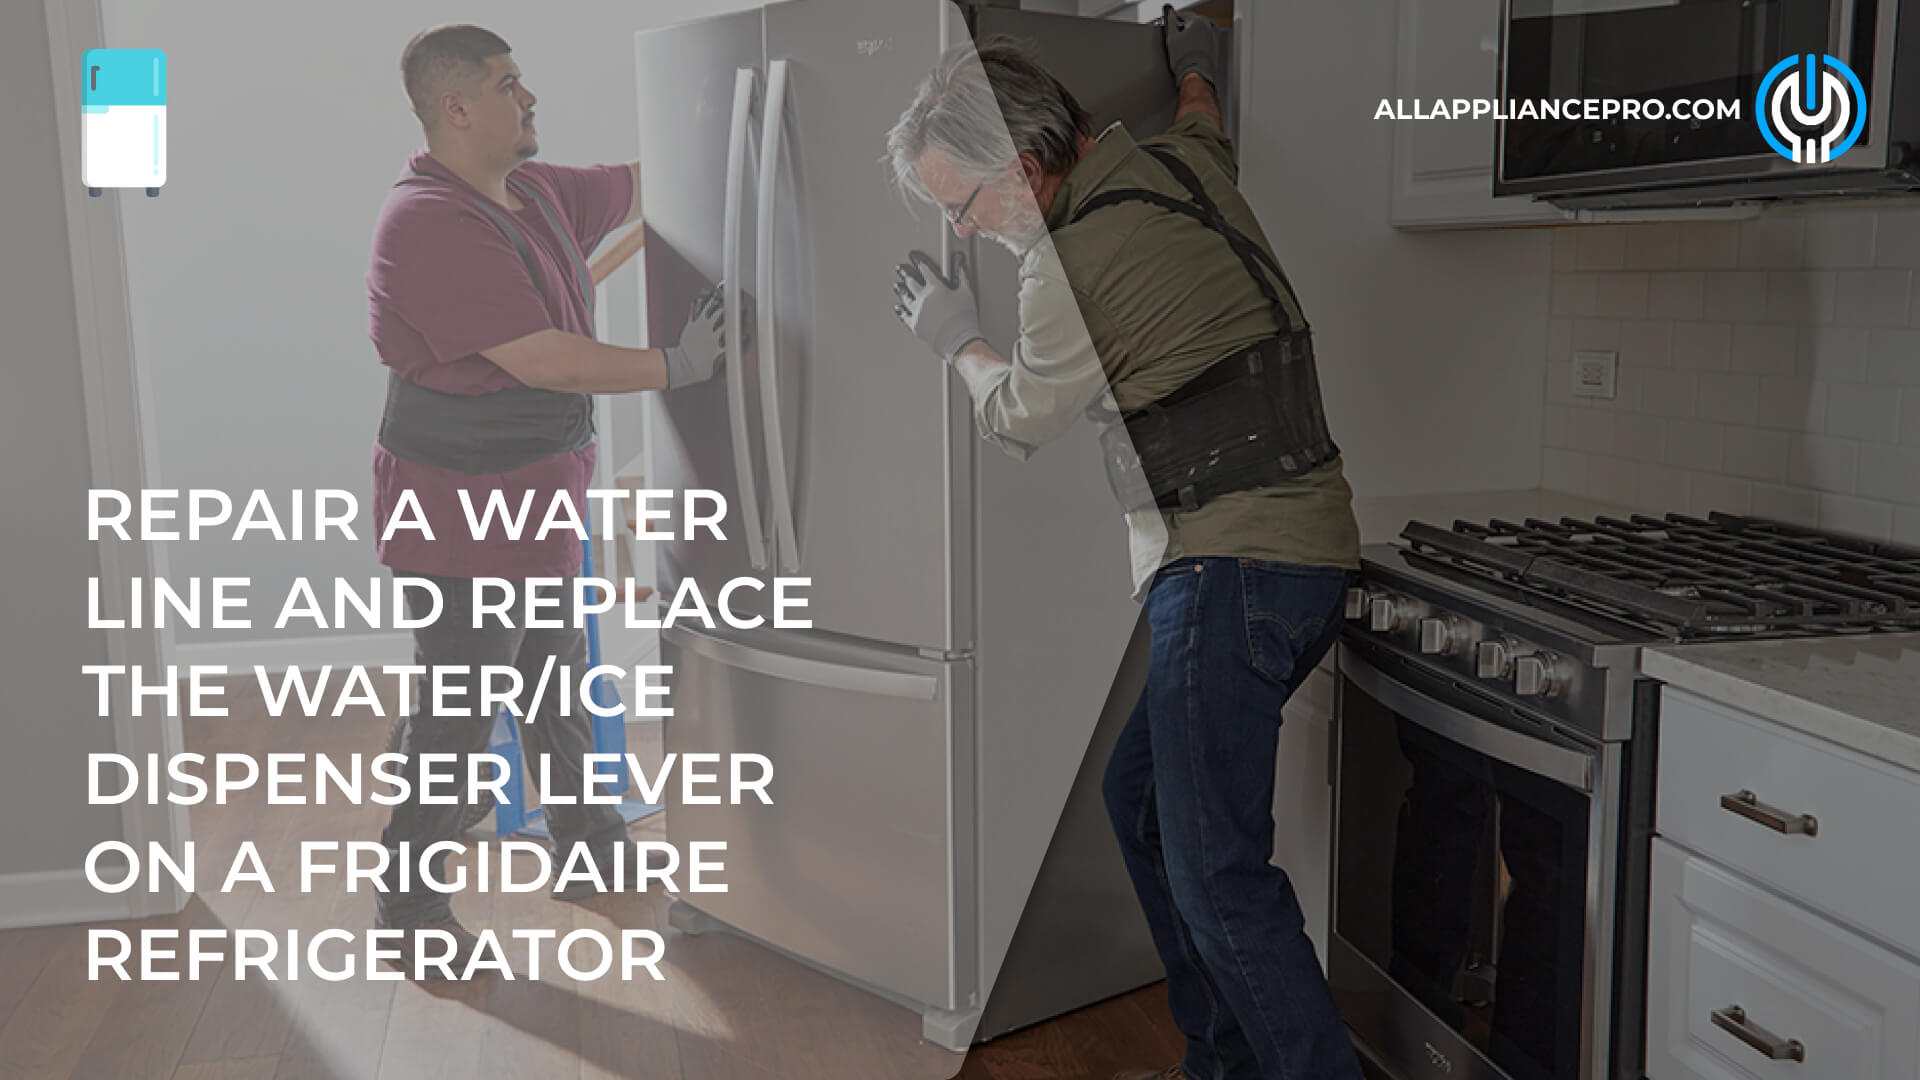 Repair a Water Line and Replace the Water/Ice Dispenser Lever on a Frigidaire Refrigerator